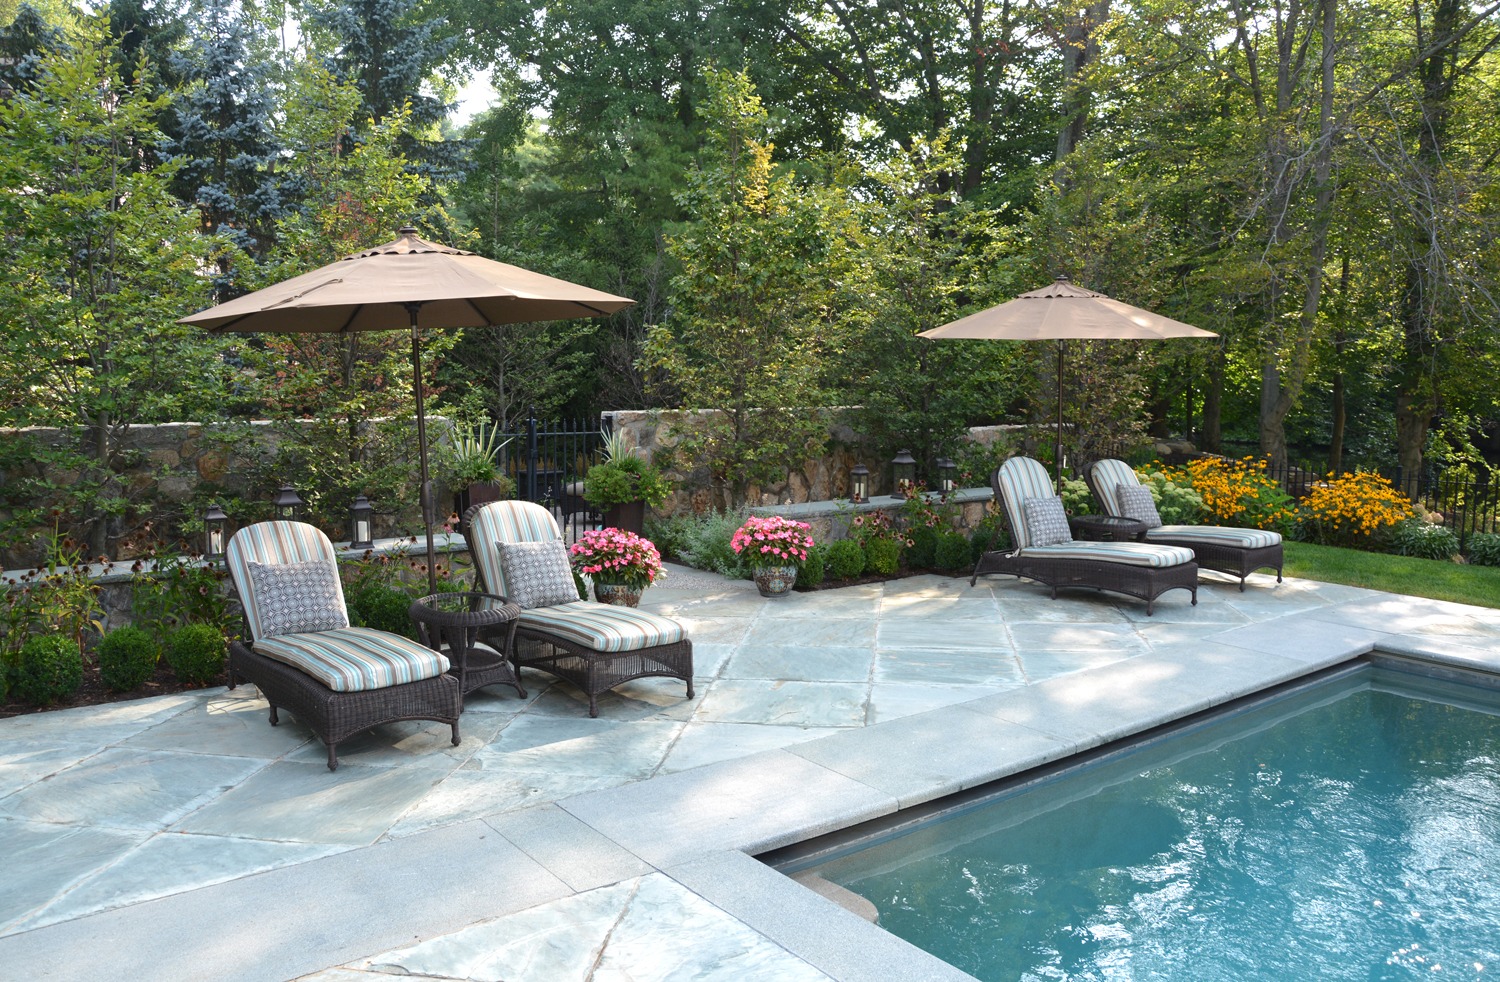 An outdoor pool area with lounge chairs, umbrellas, and flowering plants surrounded by trees with a stone wall in the background.